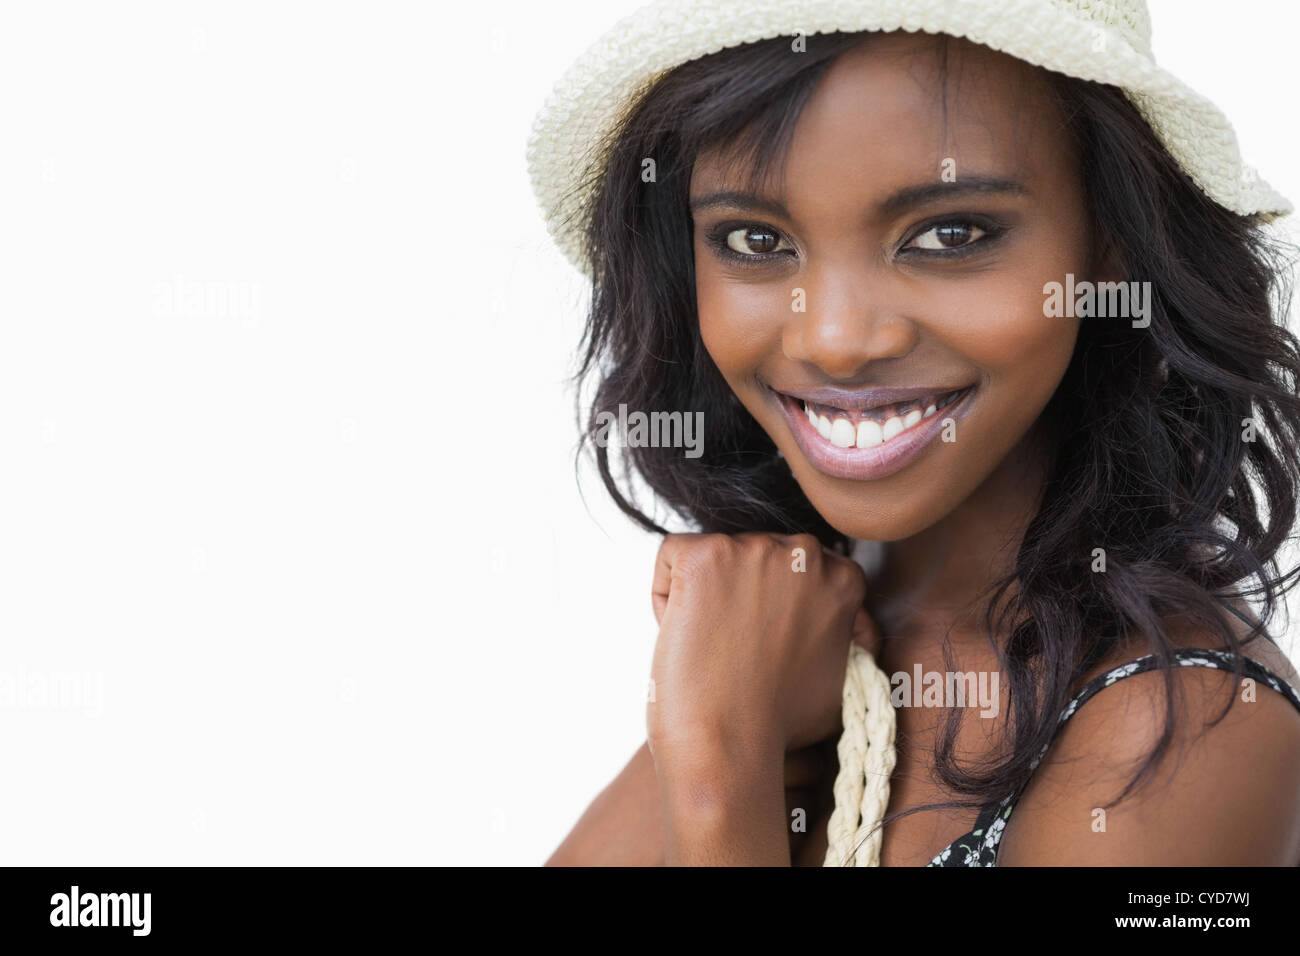 Smiling woman in summer fashion Stock Photo